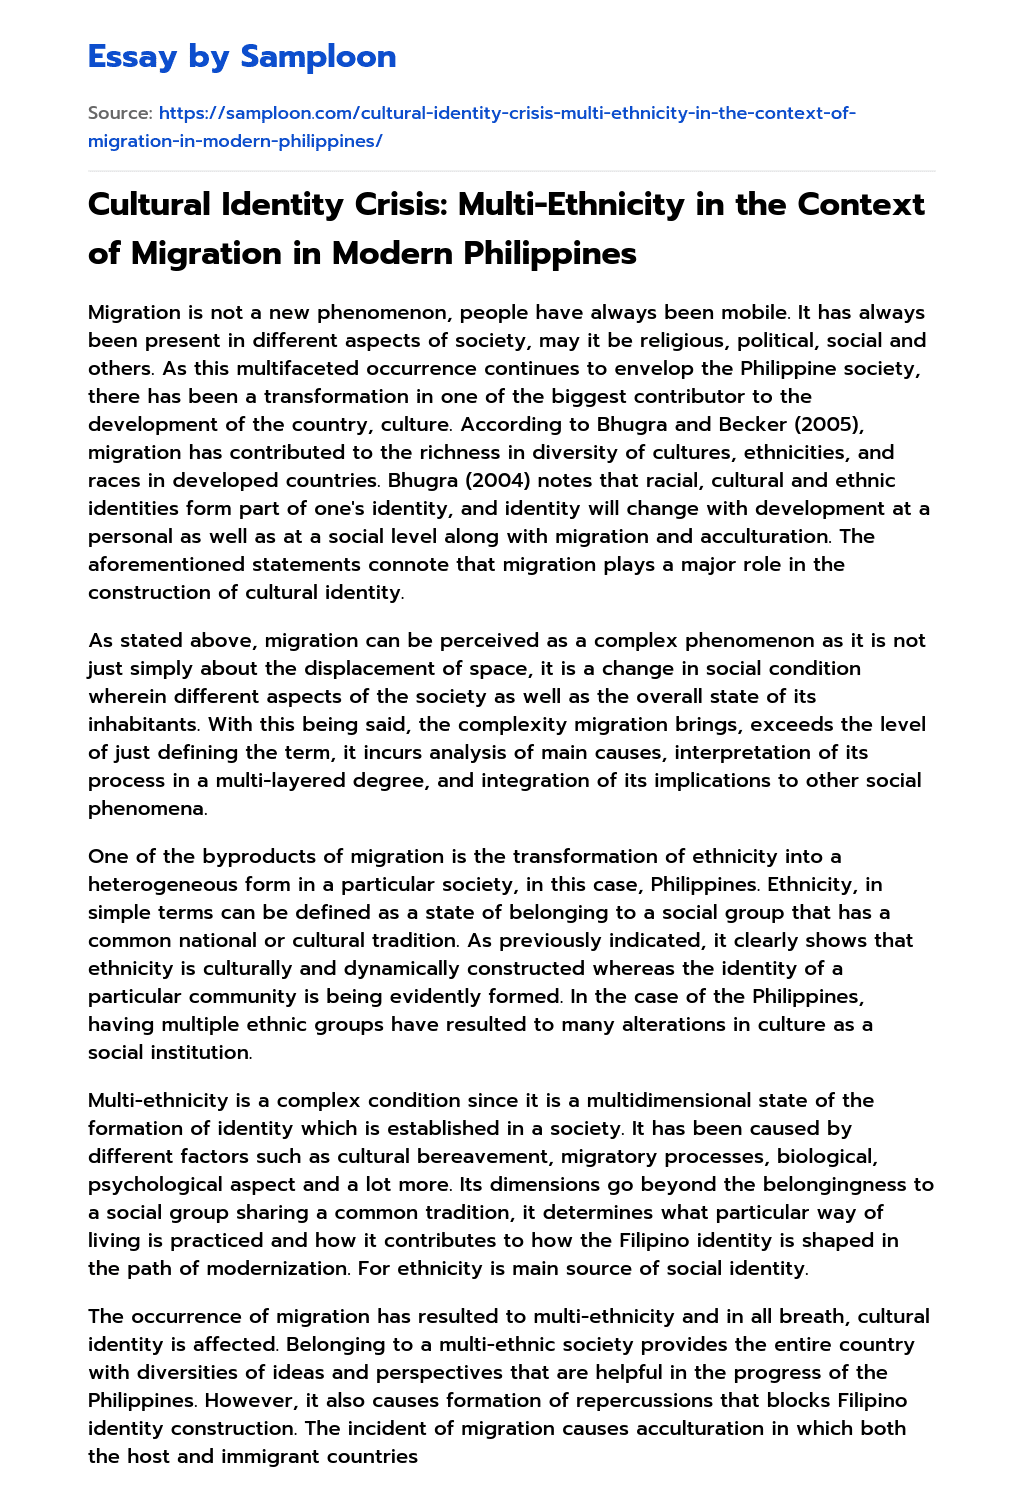 Cultural Identity Crisis: Multi-Ethnicity in the Context of Migration in Modern Philippines essay